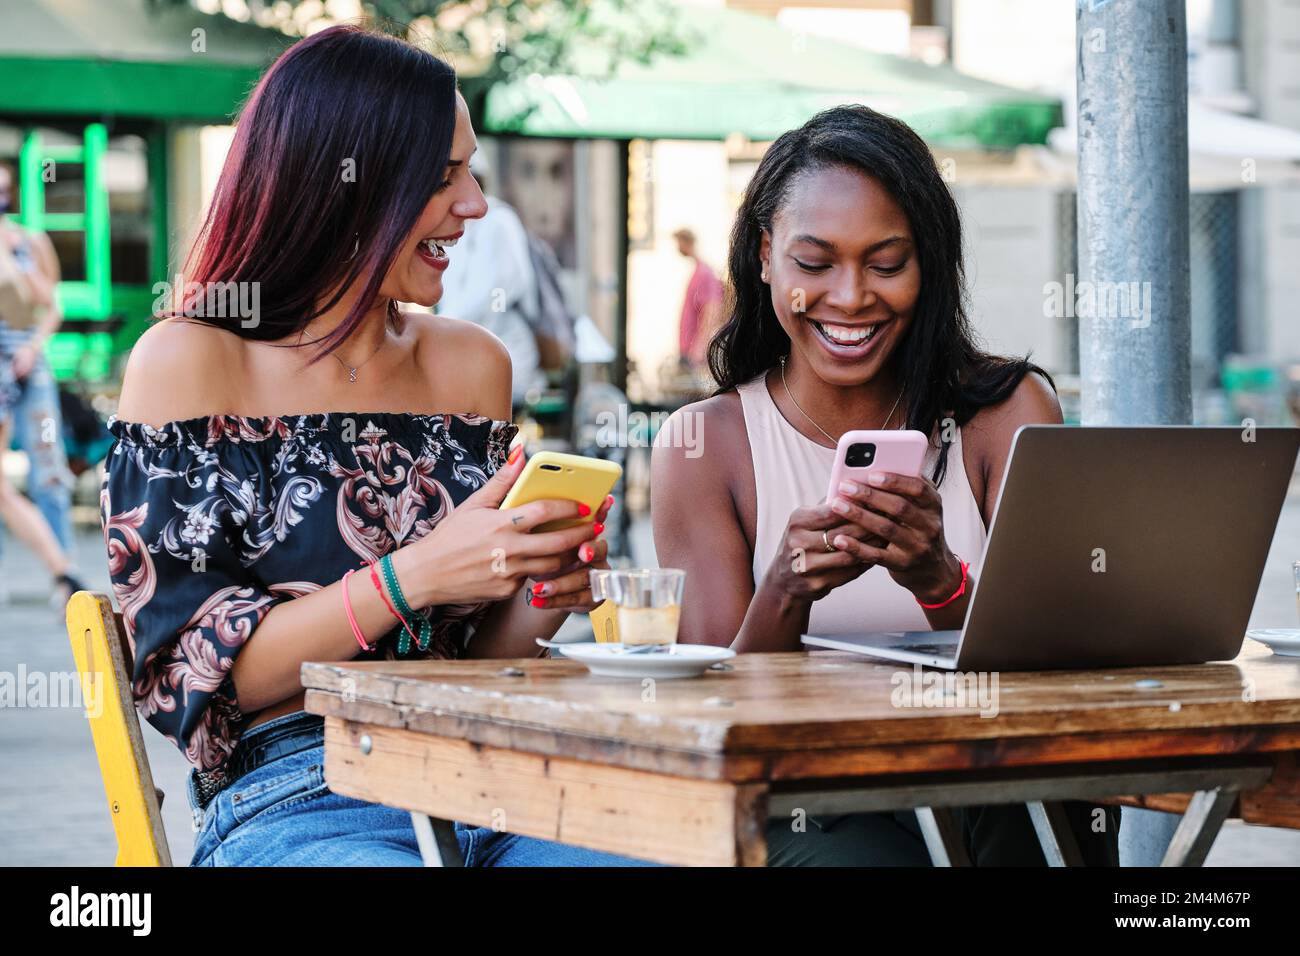 Two woman using mobiles while sitting in a cafeteria Stock Photo